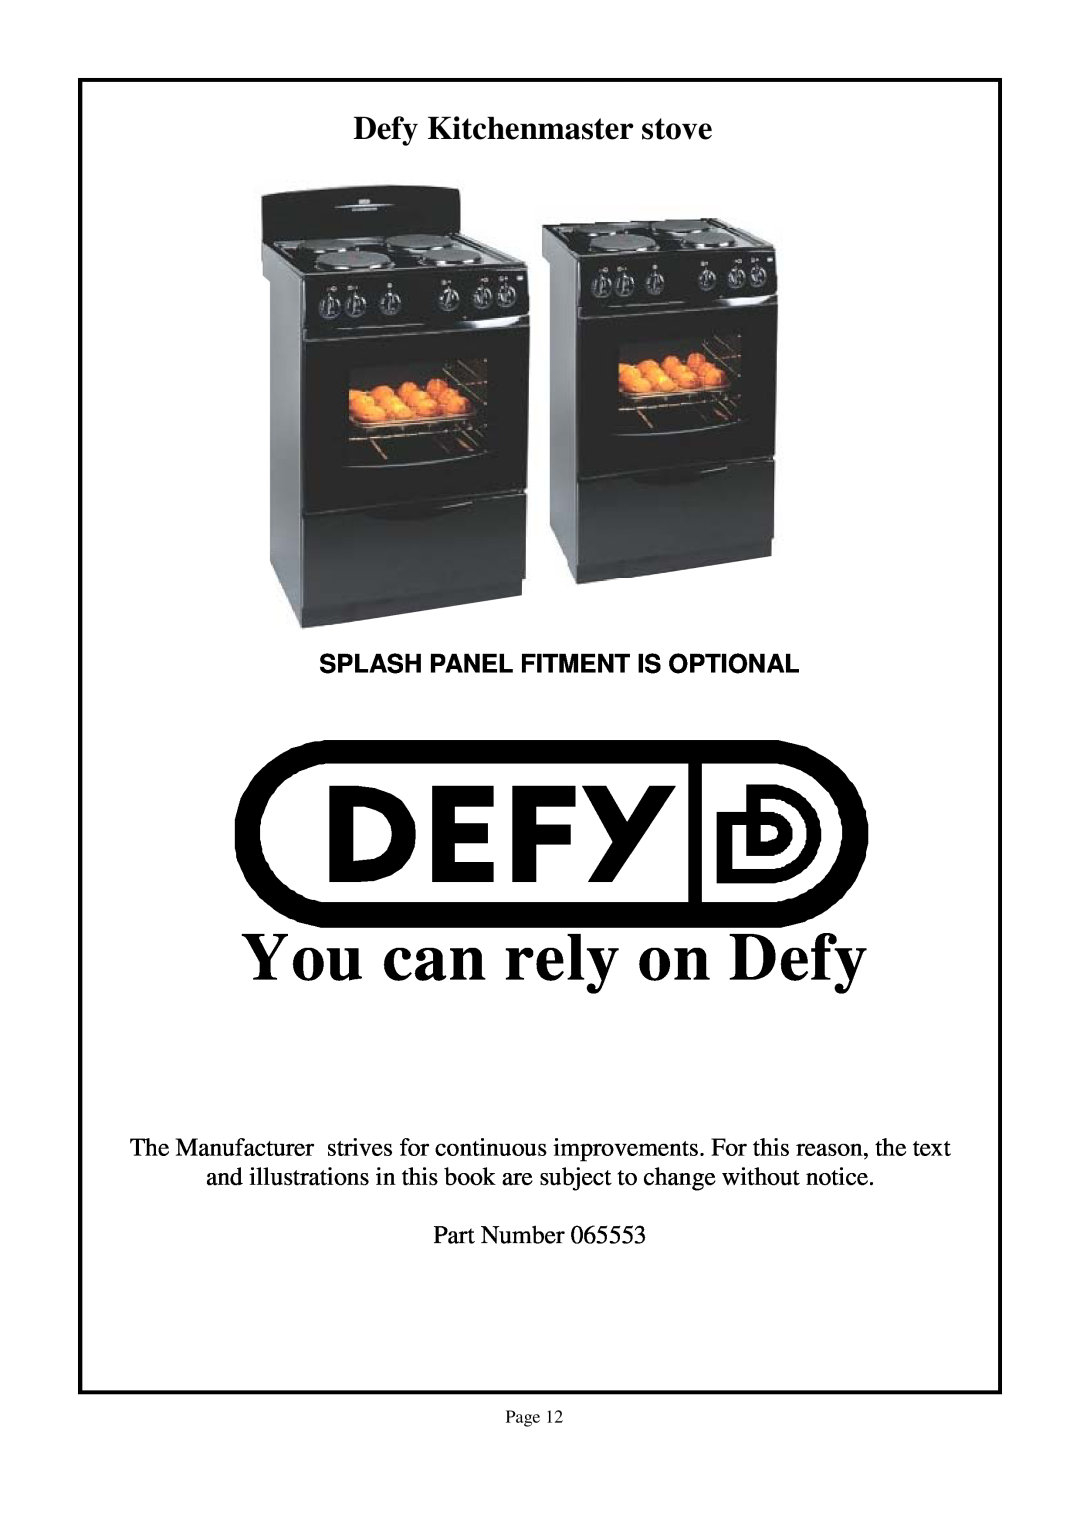 Defy Appliances SBW owner manual You can rely on Defy, Defy Kitchenmaster stove, Splash Panel Fitment Is Optional, Page 